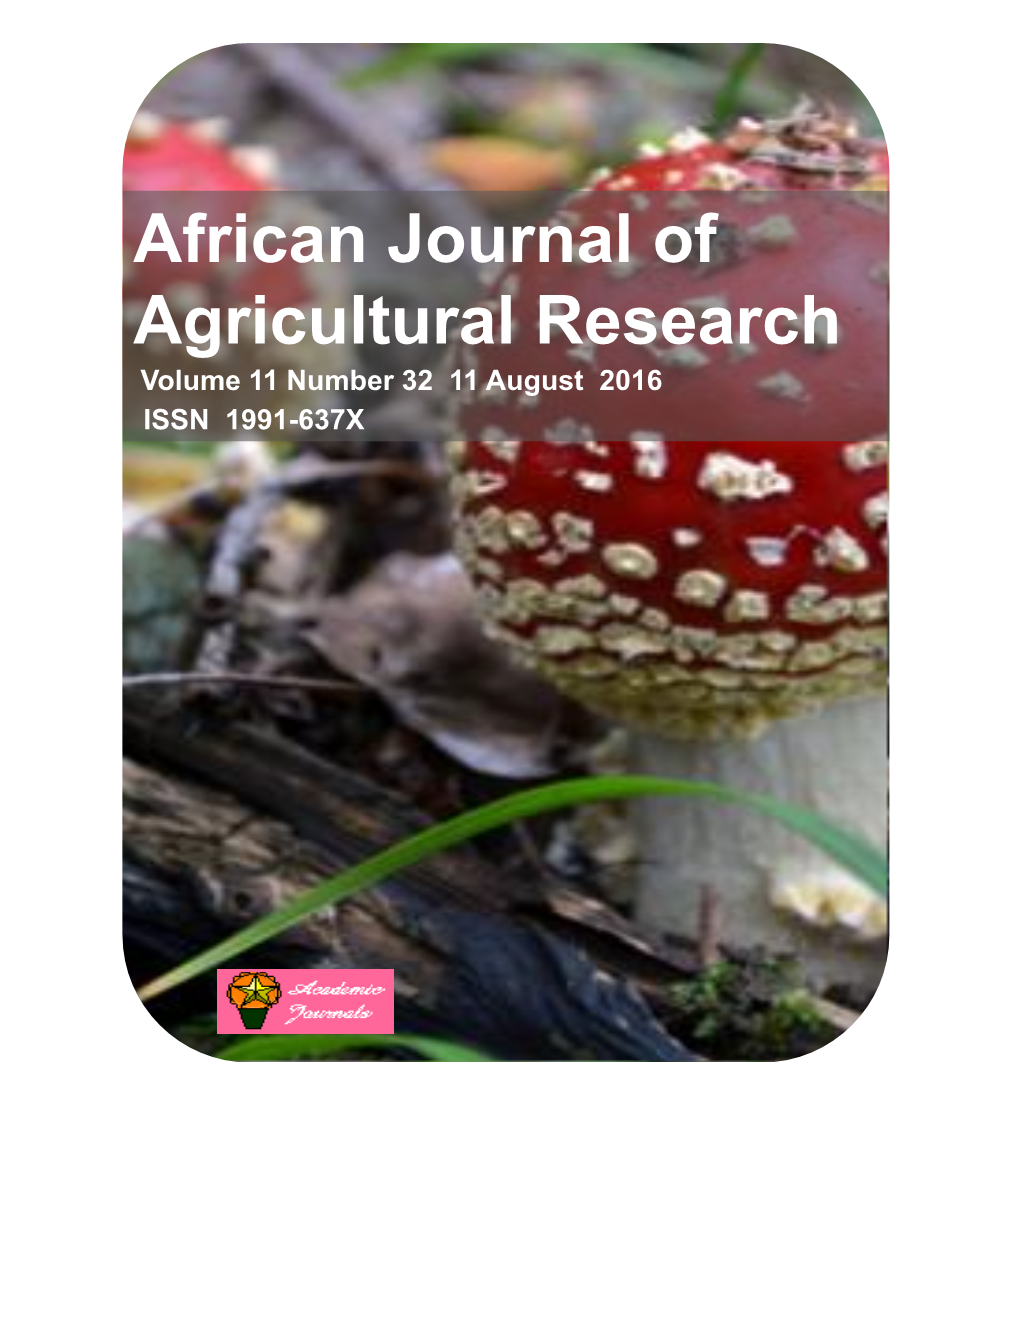 African Journal of Agricultural Research Volume 11 Number 32 11 August 2016 ISSN 1991-637X